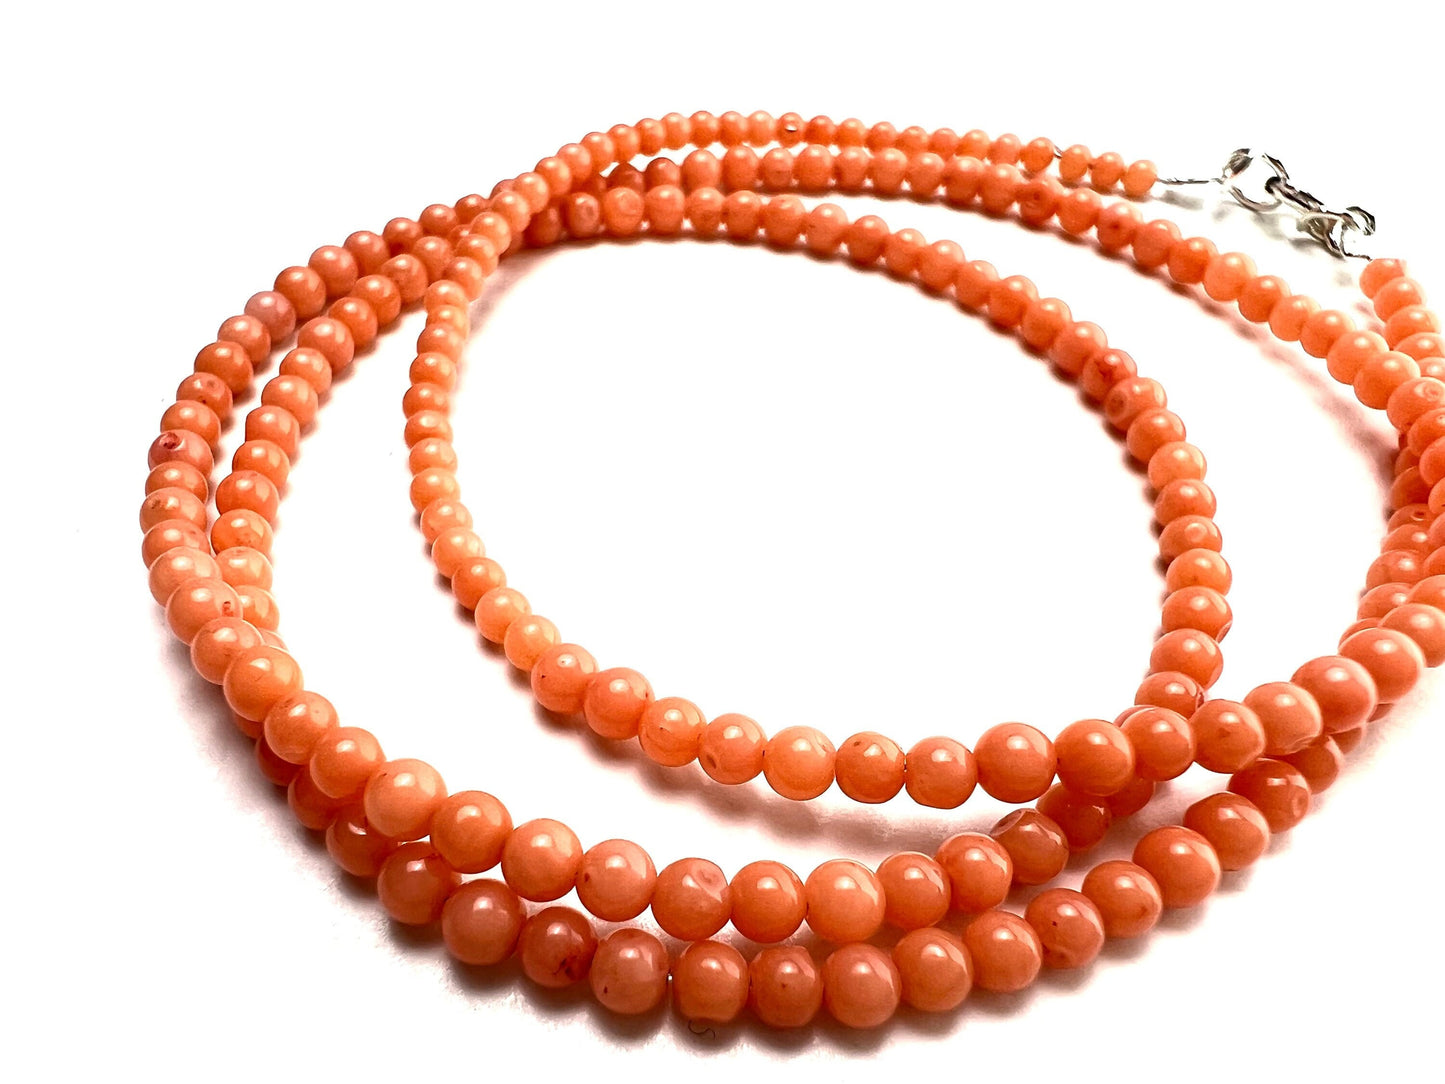 Natural Bamboo pink Coral 3mm salmon pink pitchy color Smooth Round Angel Skin AAA Quality handmade 925 silver necklace Beach, Boho gift